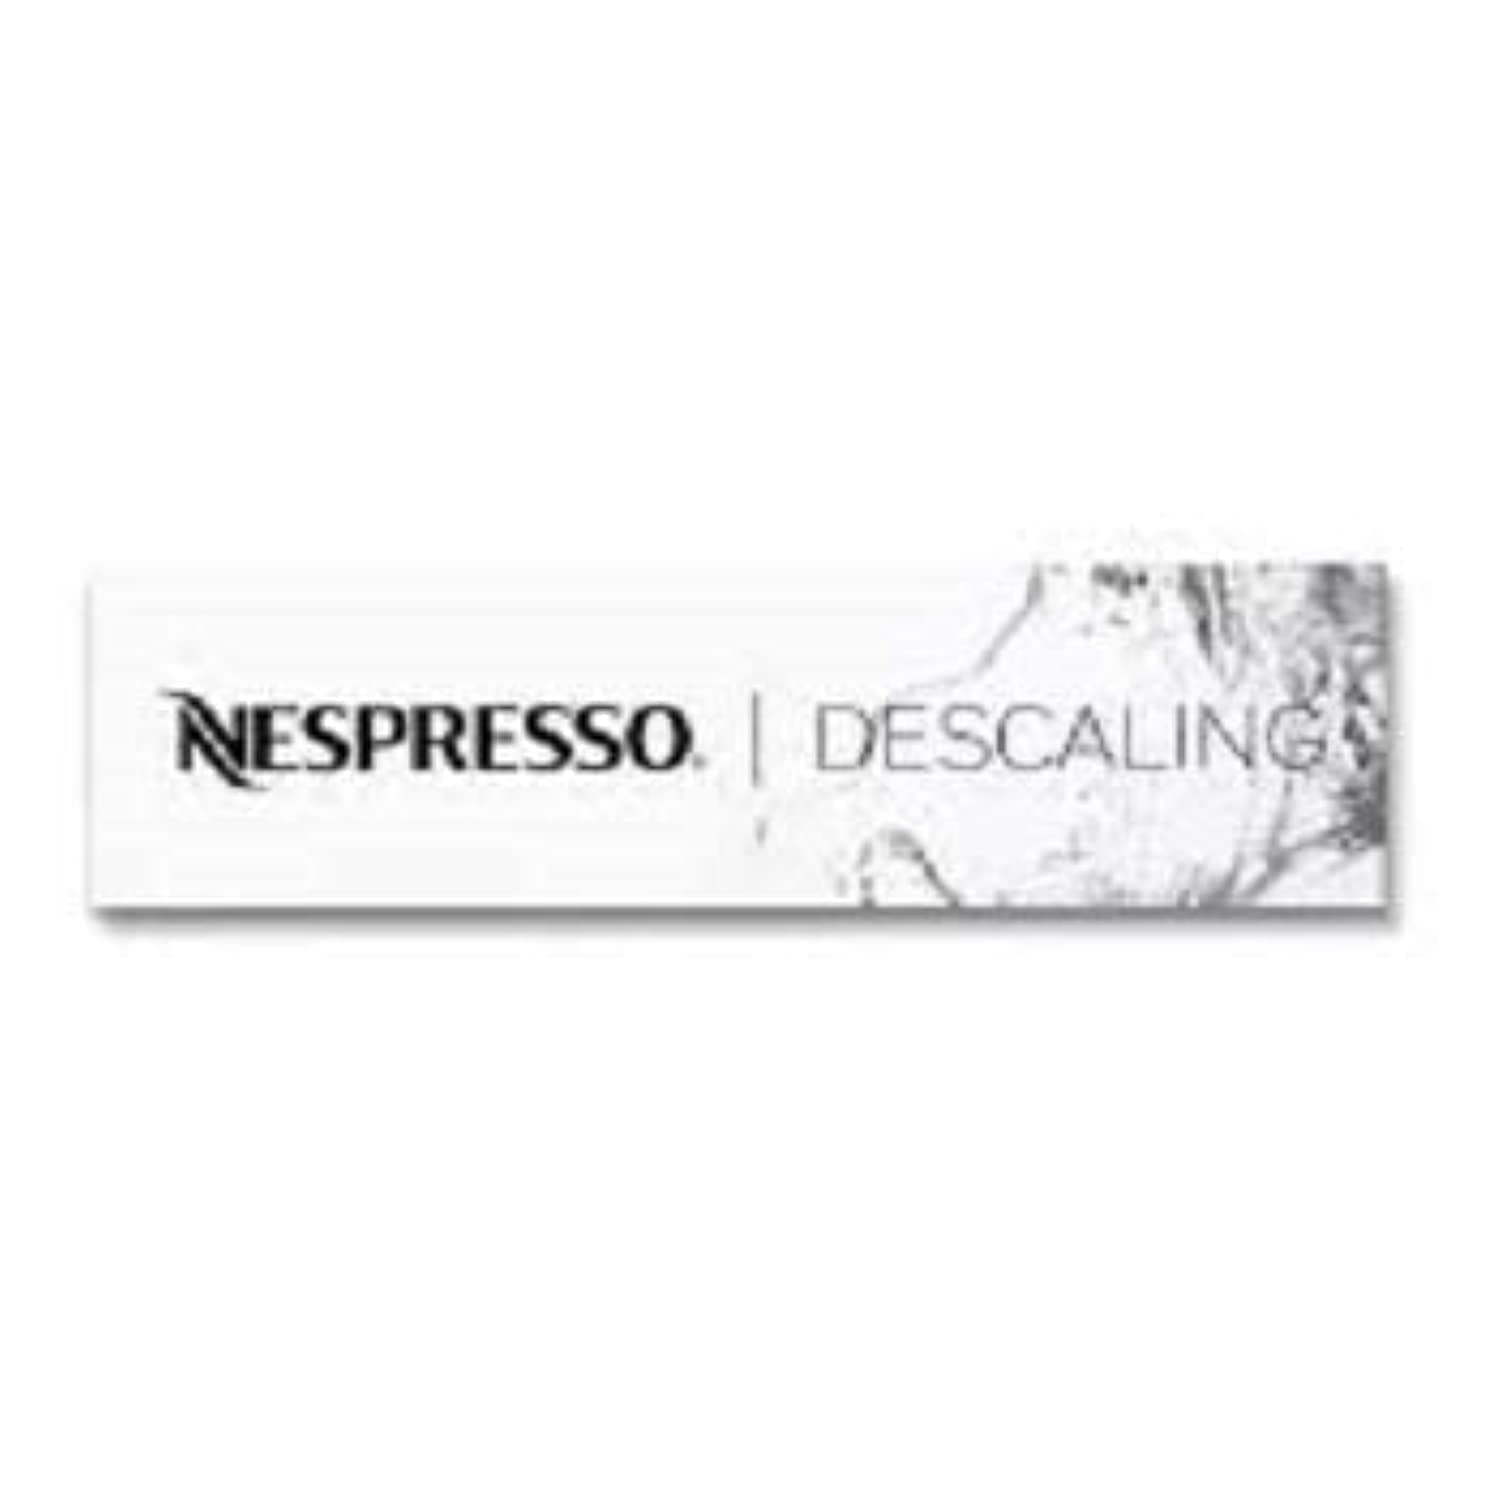 Original Nespresso Cleaning and Descaling Kit